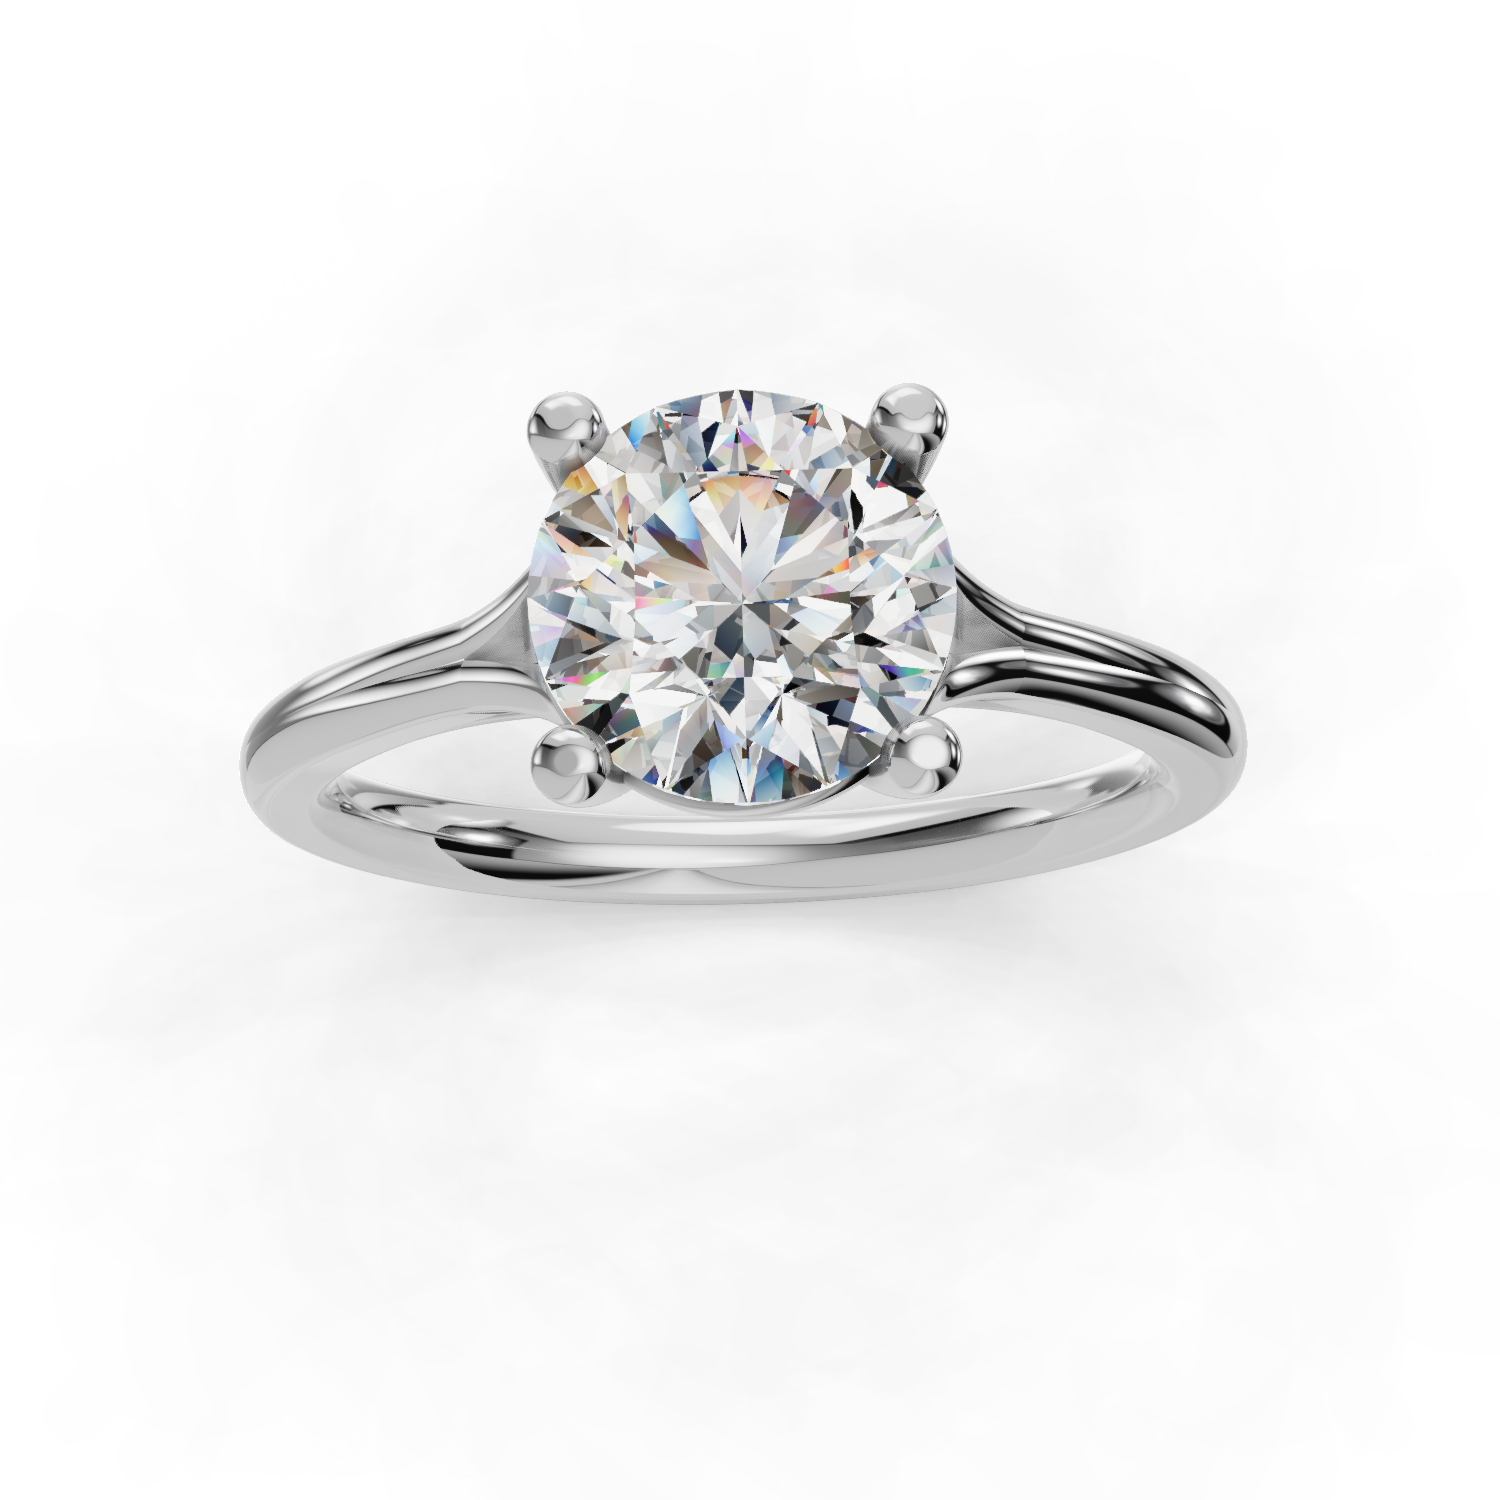 Isabella 4 prong solitaire with Split shank